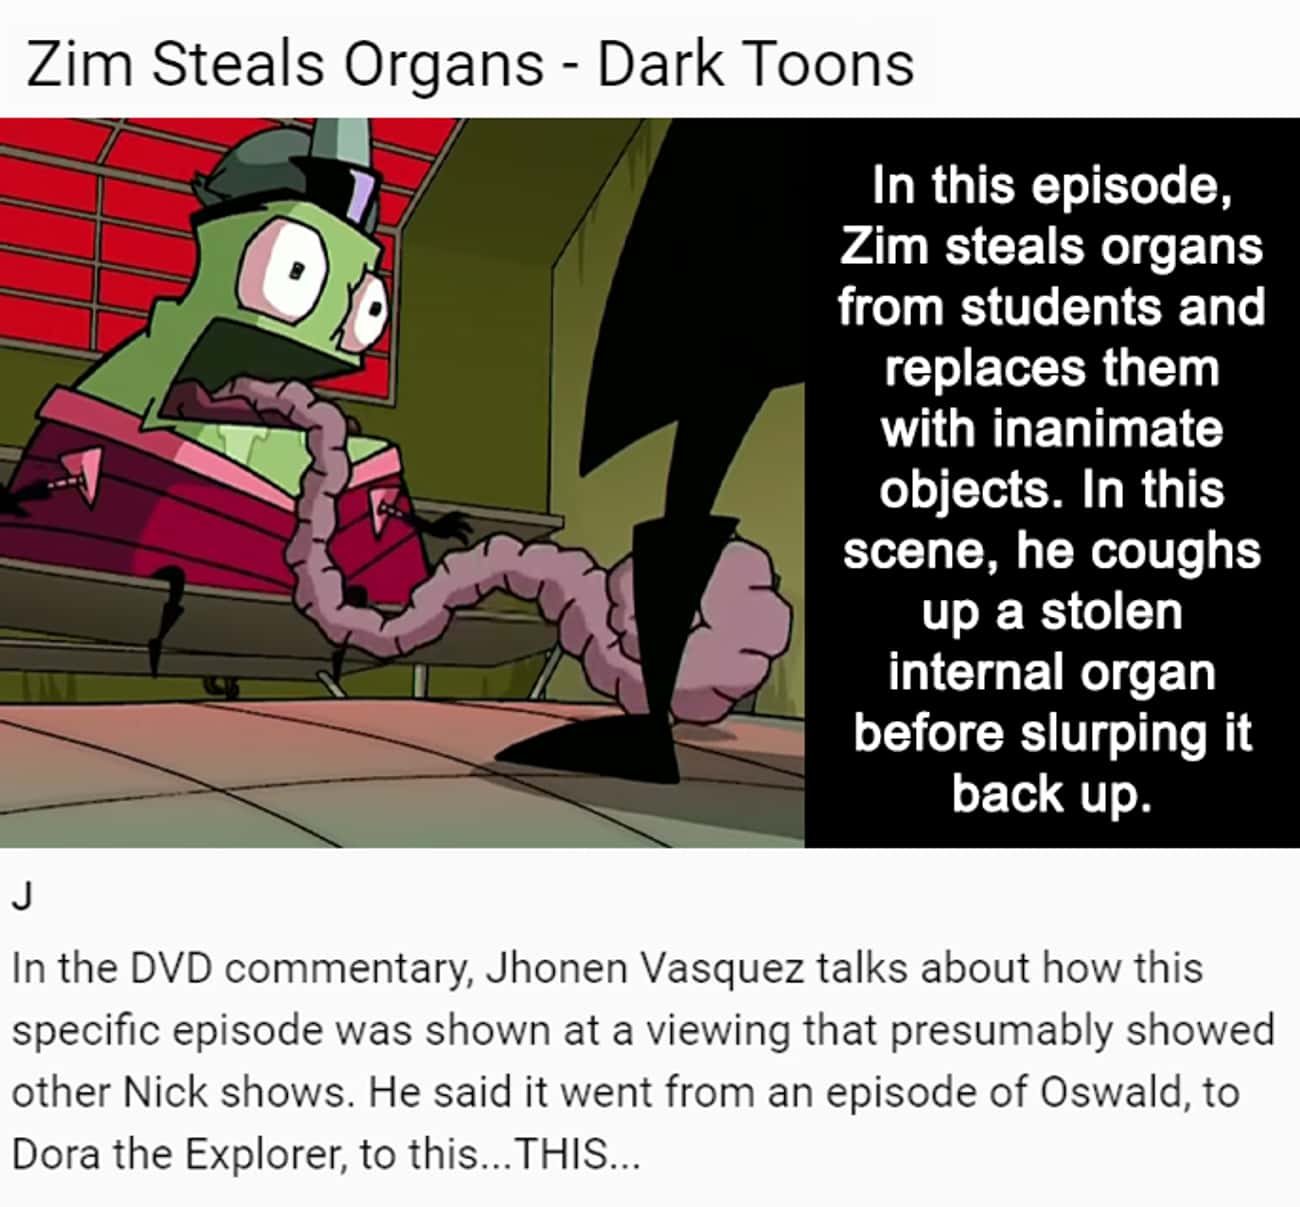 There's An Episode Where Zim Steals And Harvests Other Kids' Organs